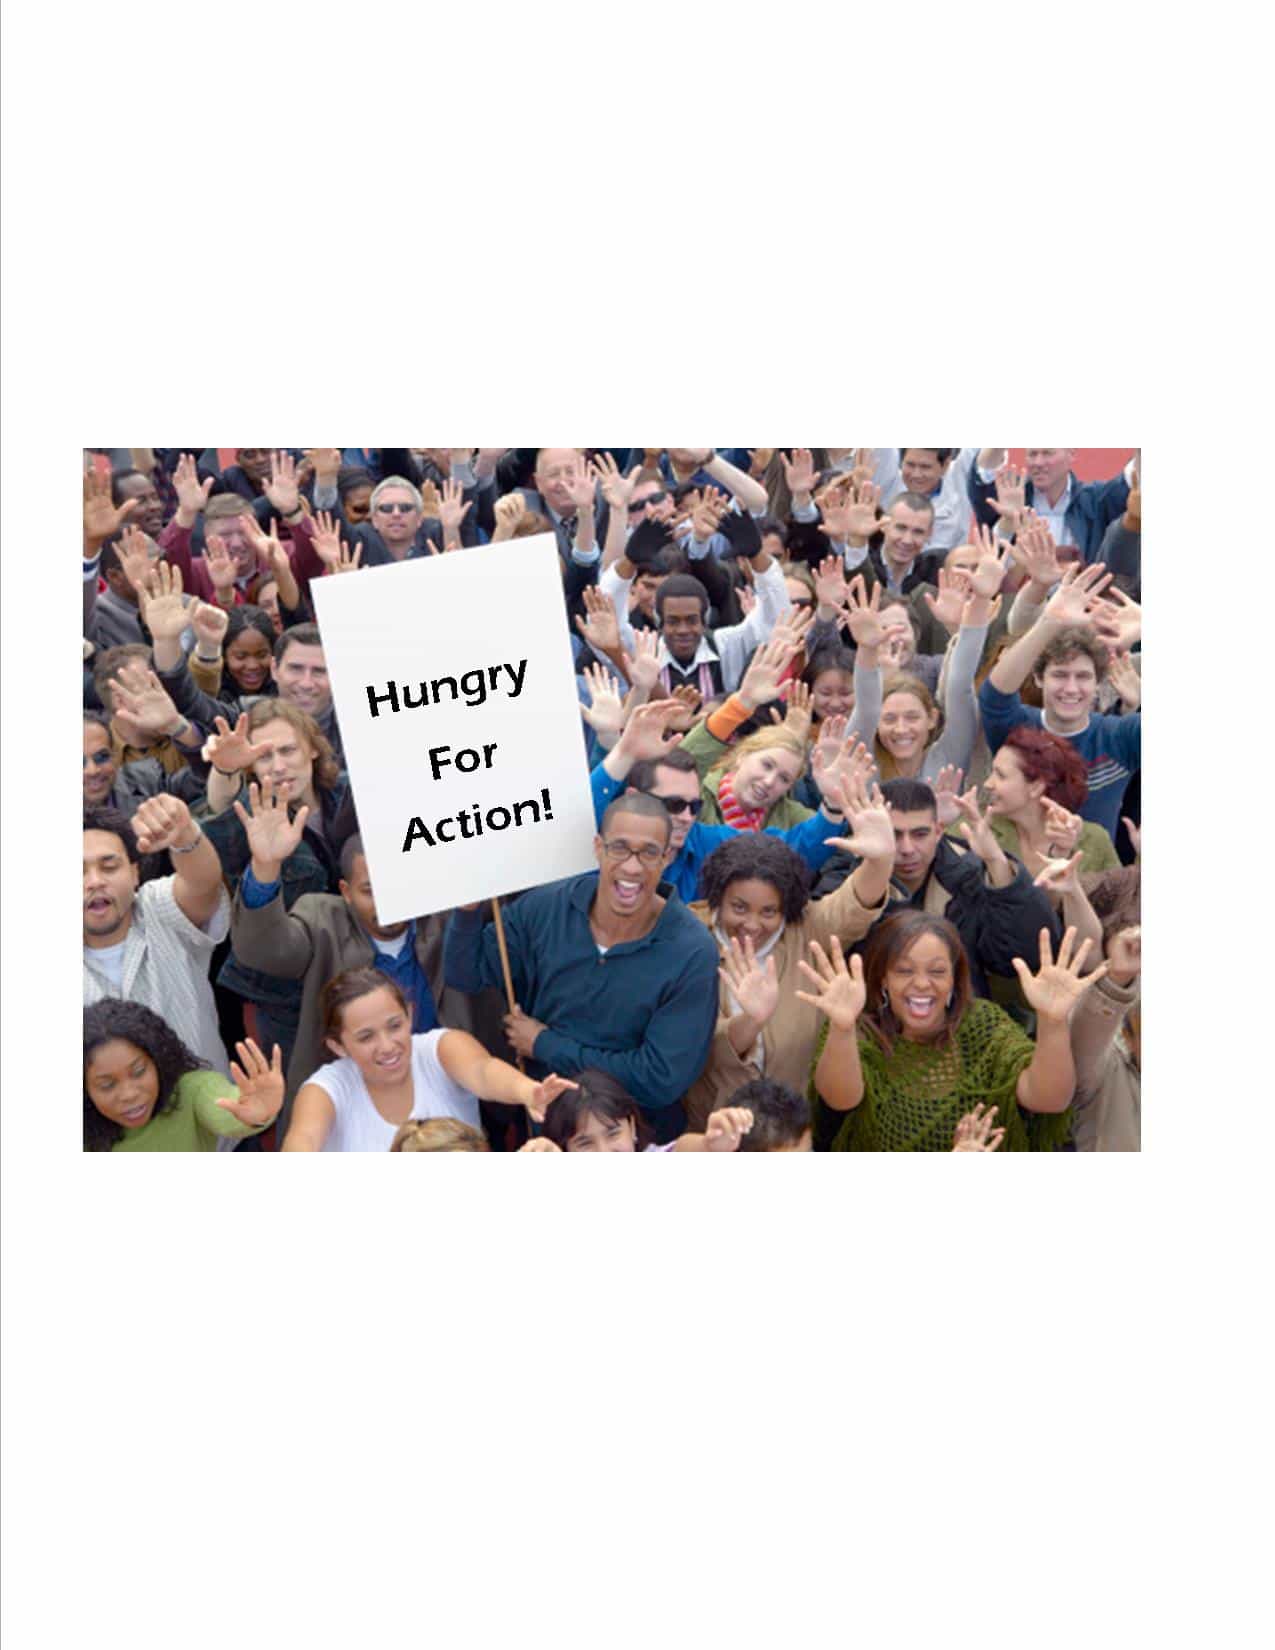 Group of people holding a sign that says Hungry for Action.